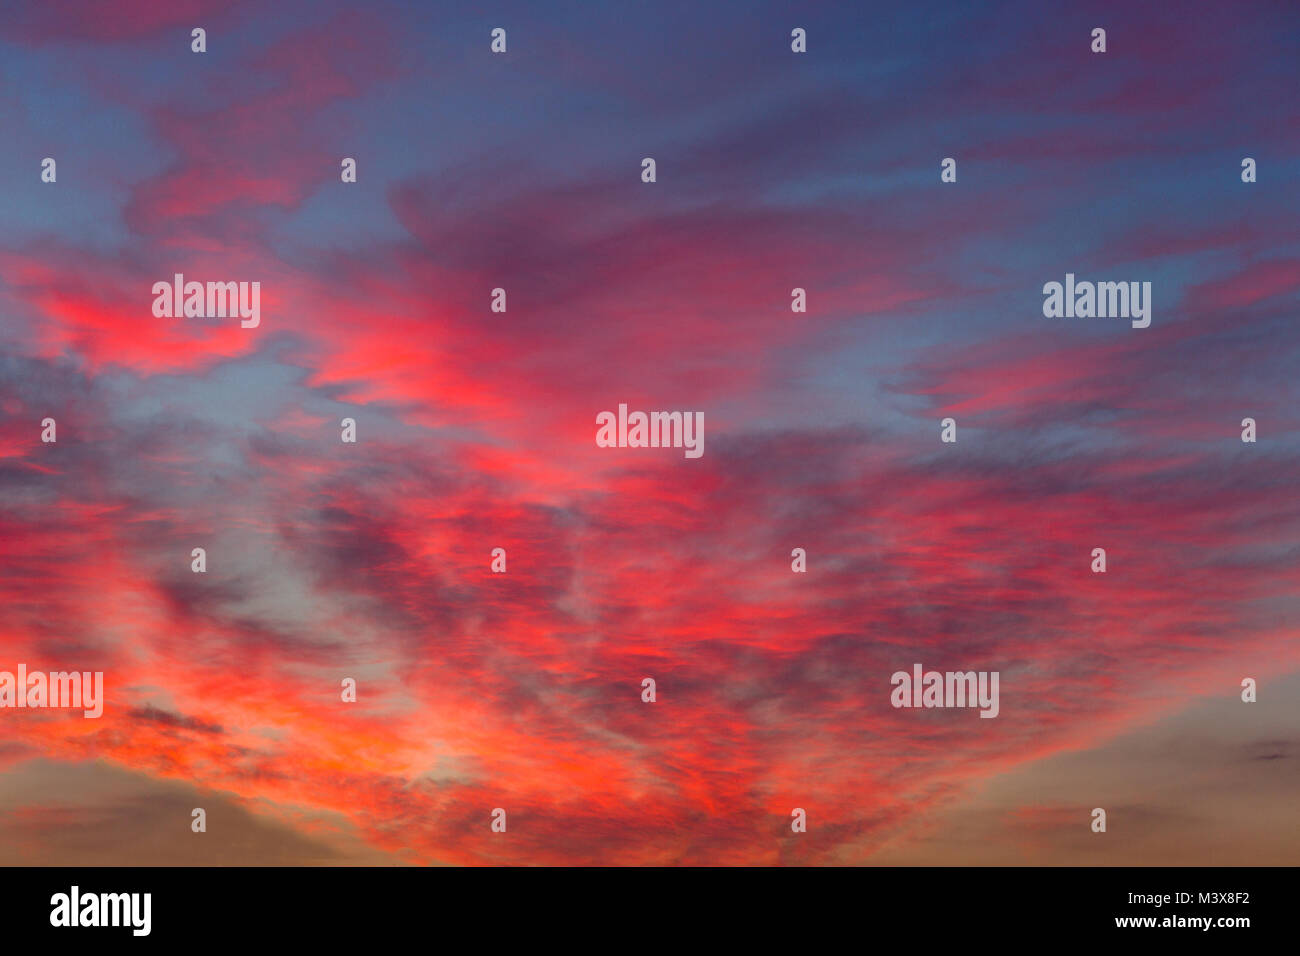 Pink purple sunset clouds on a blue sky. Colorfull abstract background. Stock Photo